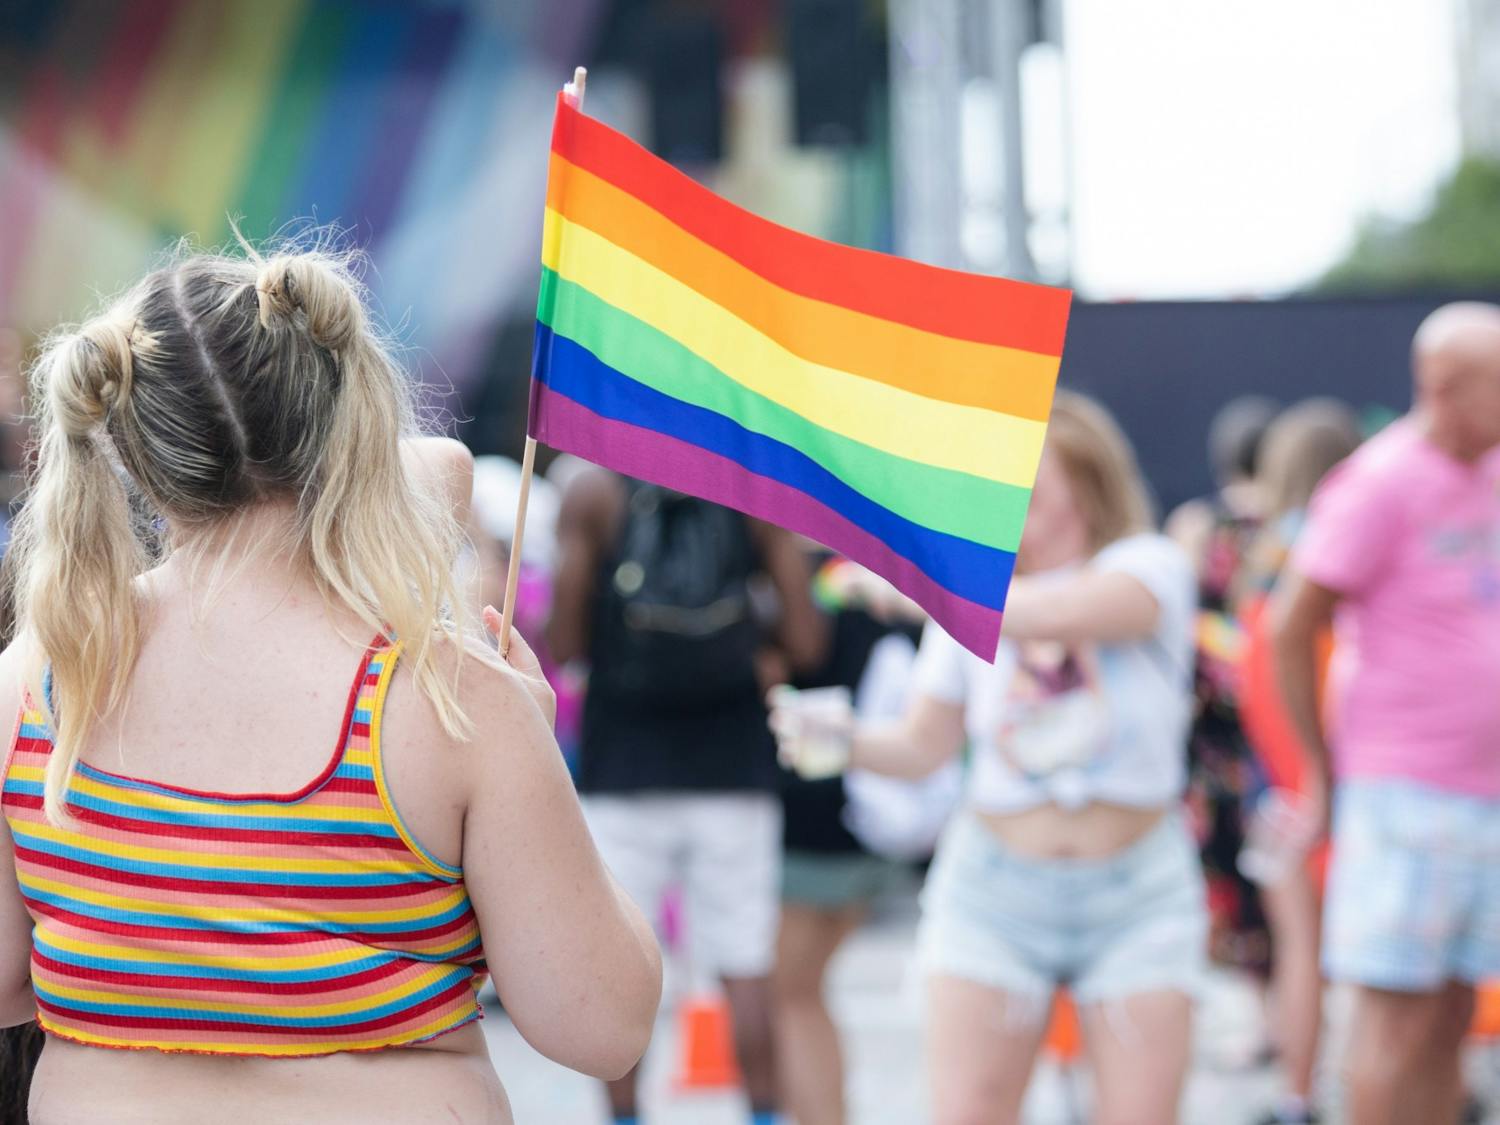 An Outfest attendee waves a rainbow flag on June 4, 2022. Outfest featured performances, food and vendors in honor of Pride month.&nbsp;